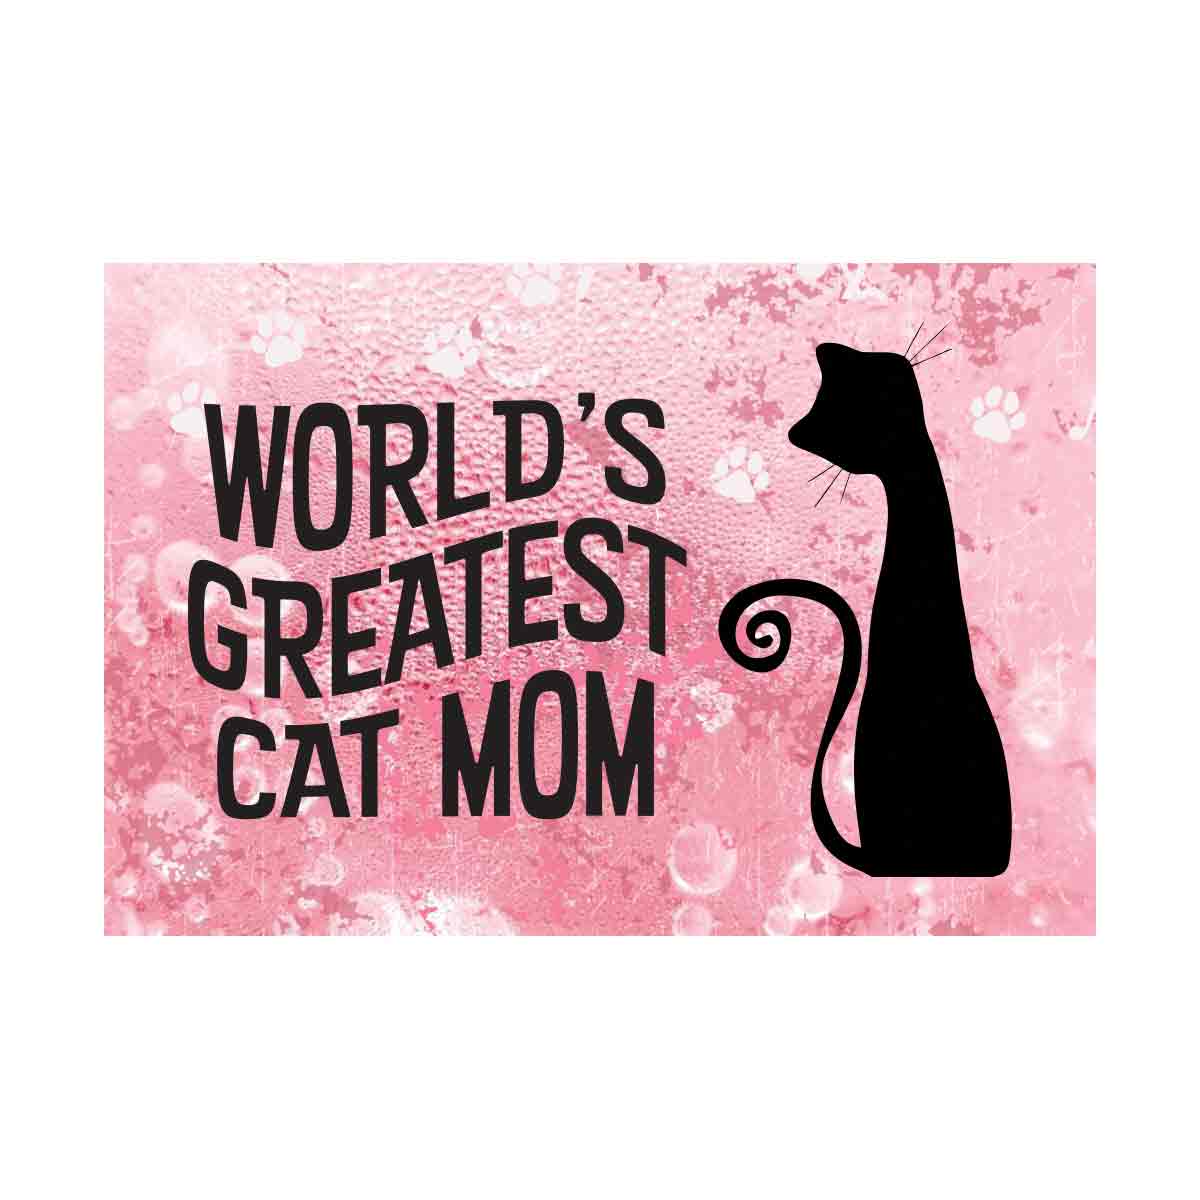 Worlds greatest cat mom - Pink